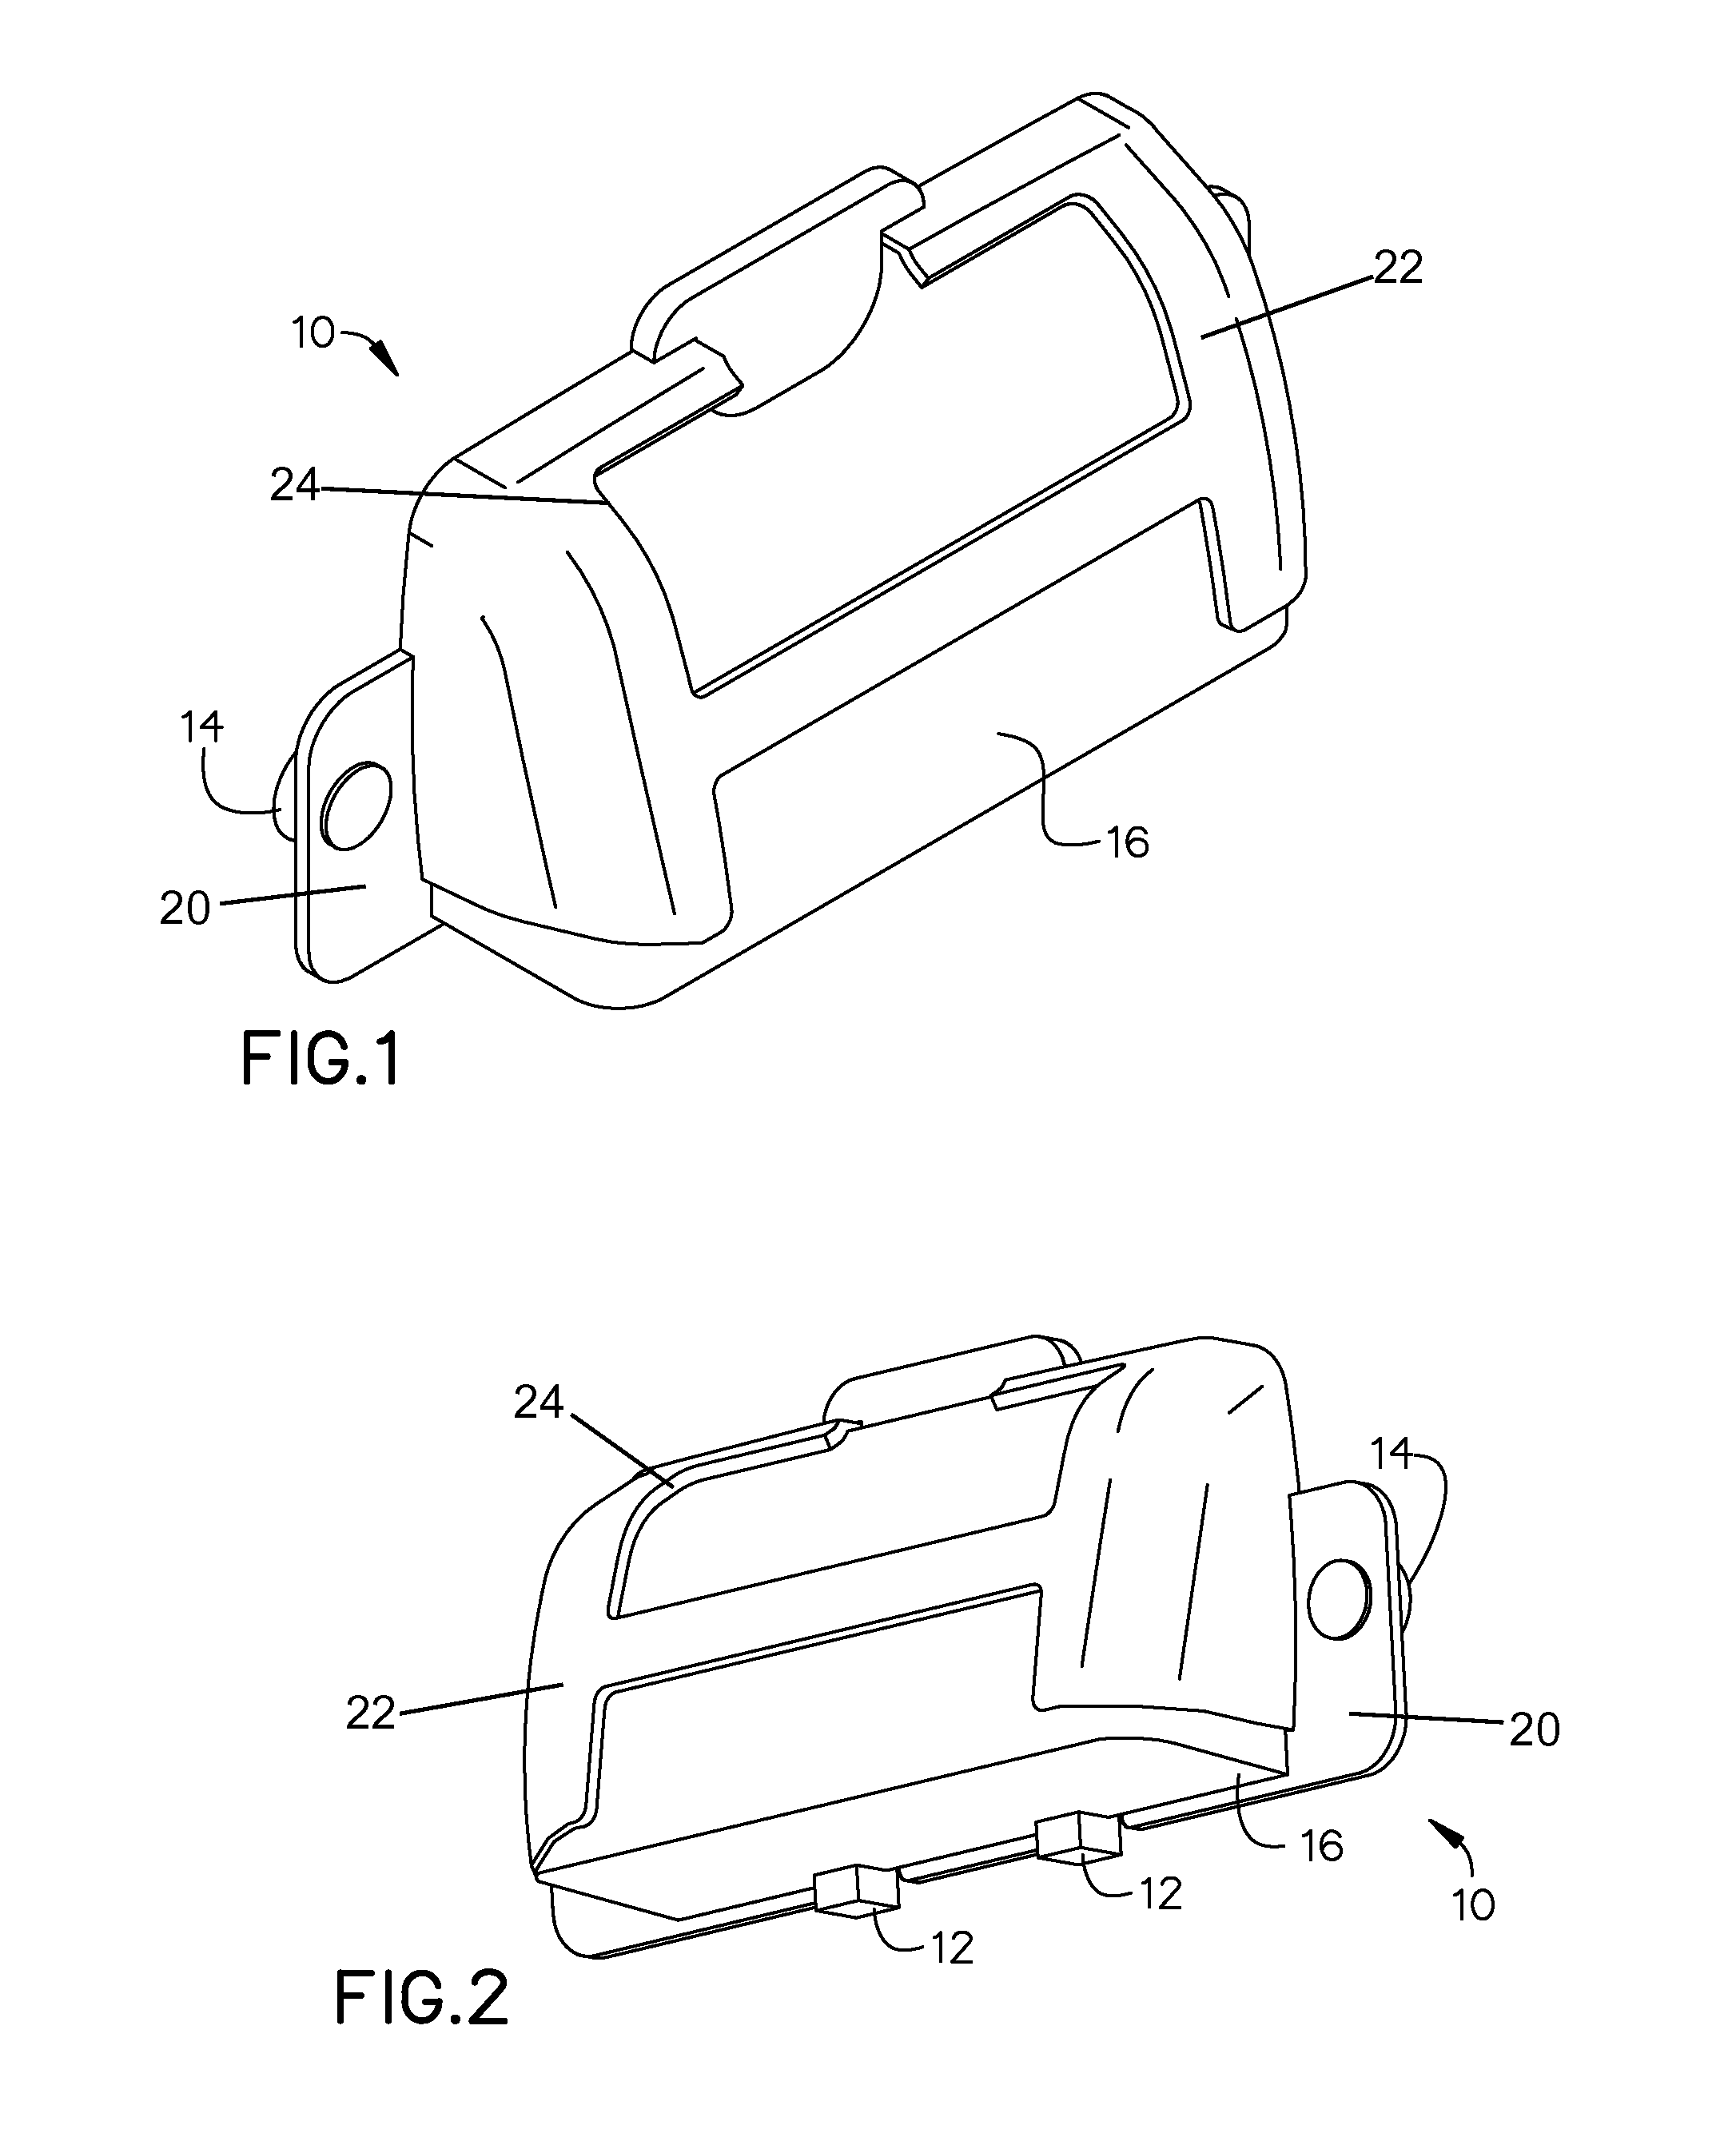 Electronic tag holding device